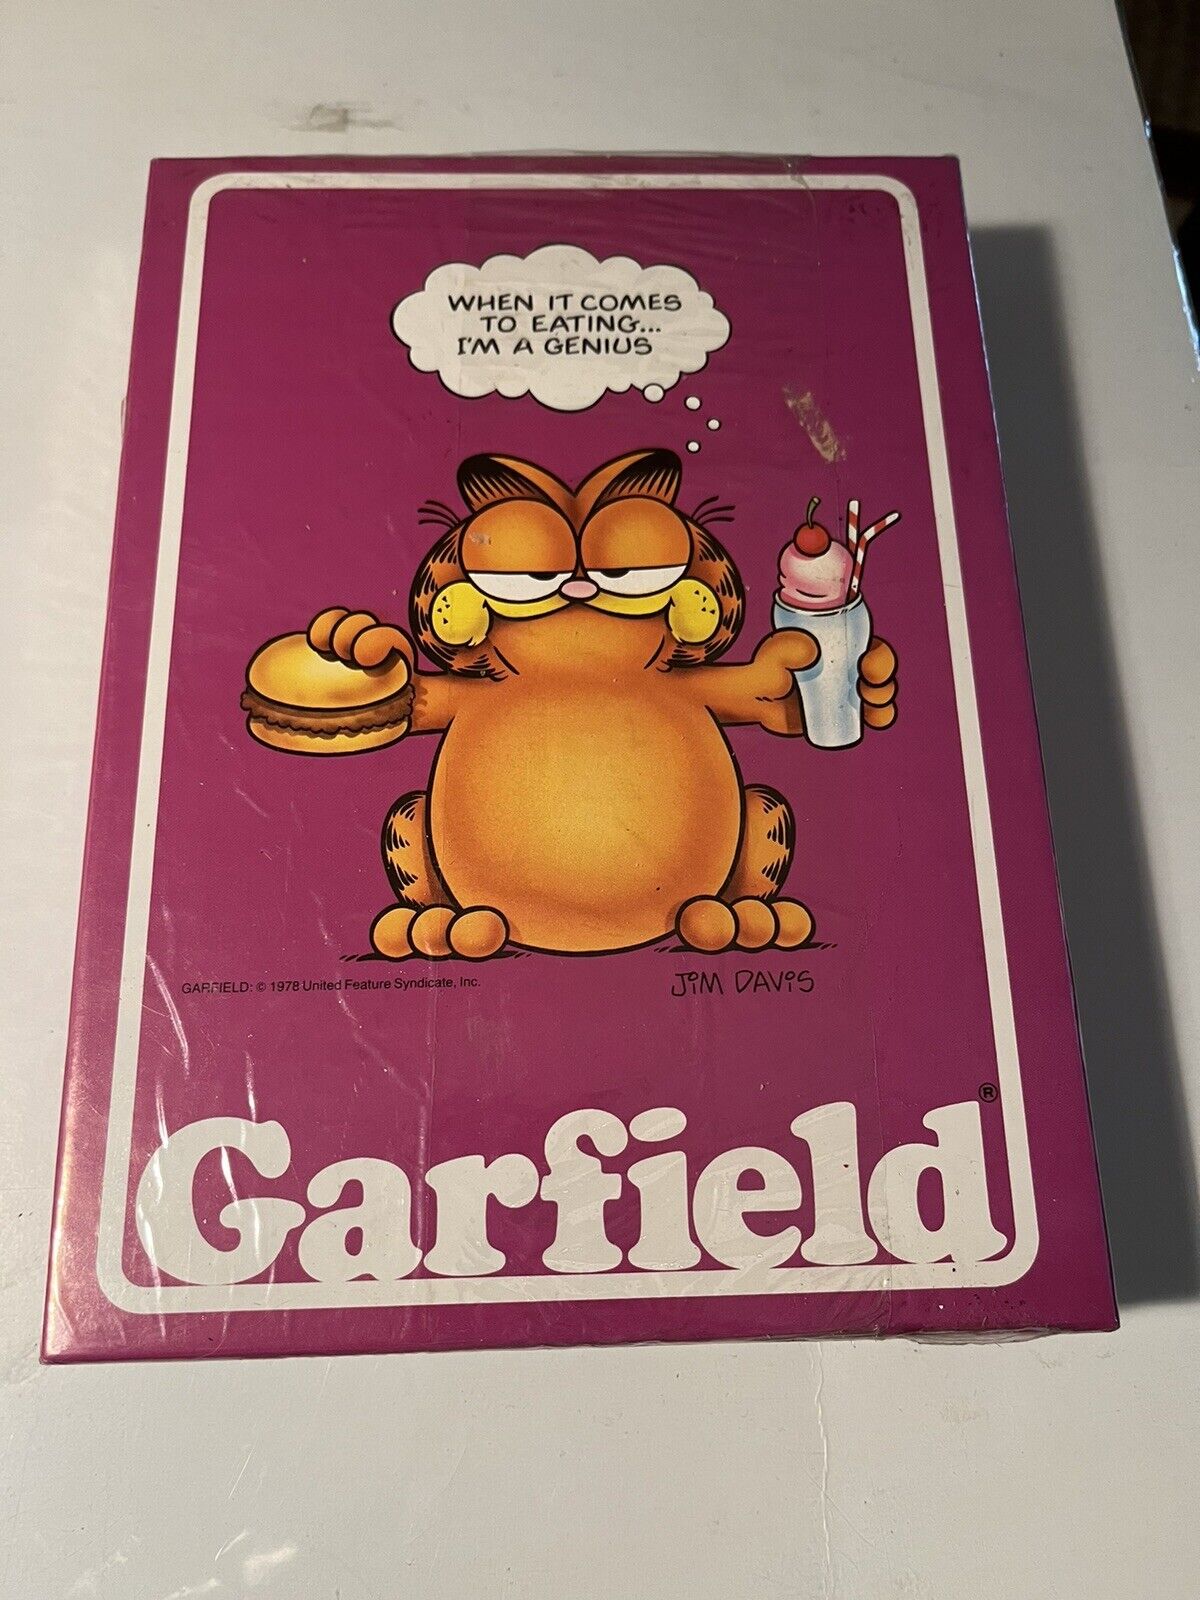 Vintage 1978 Garfield Stationary Box Set Unopen “When It Comes To Eating …